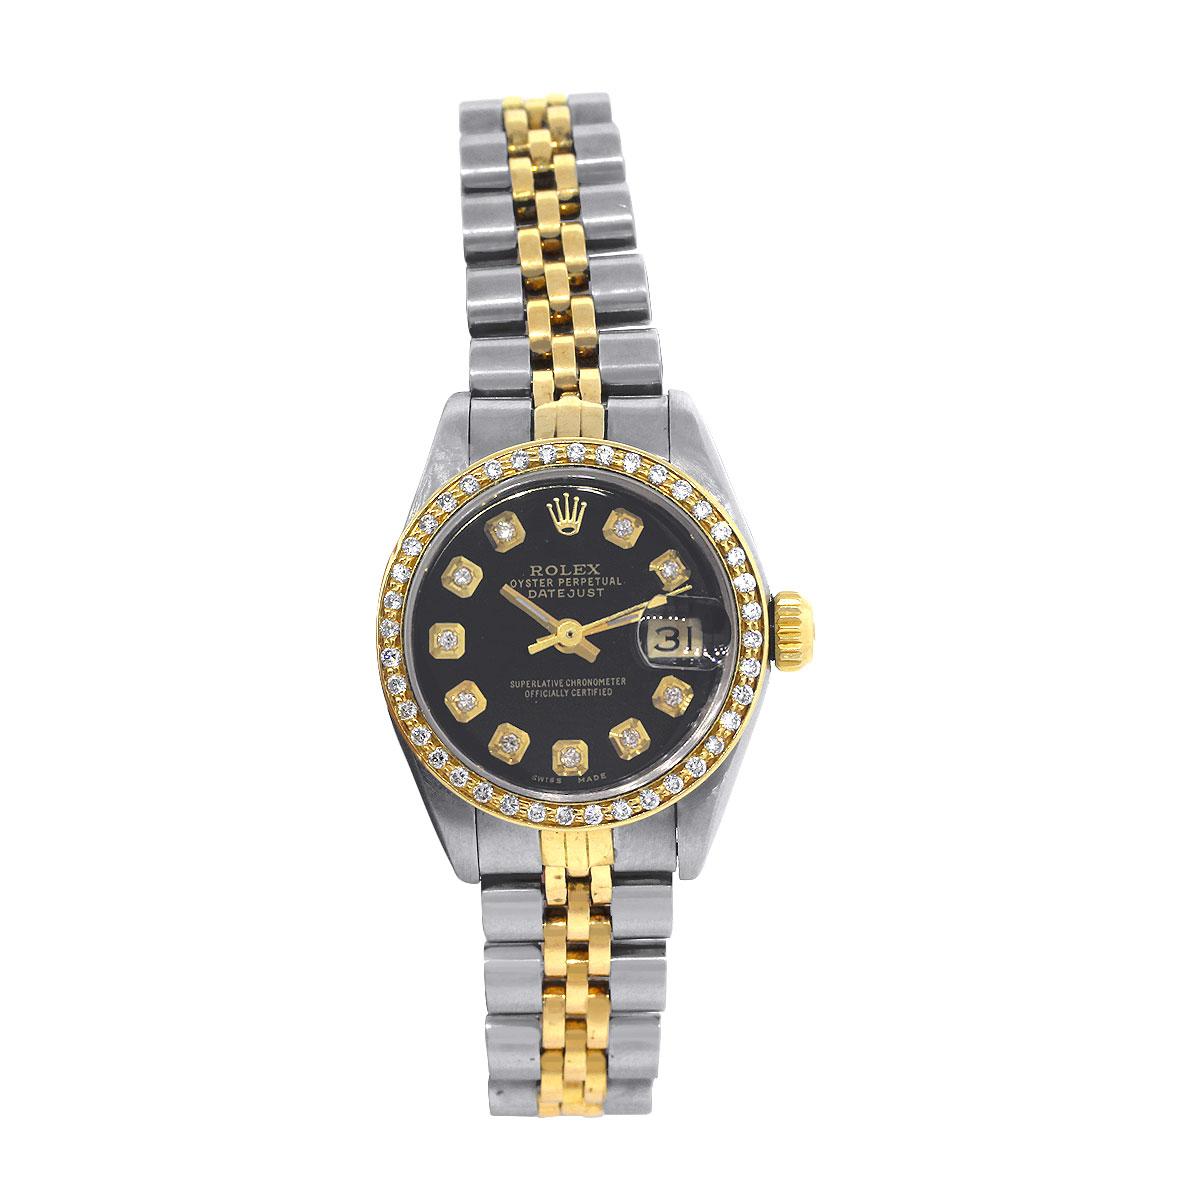 Brand: Rolex
MPN: 69173
Model: Datejust
Case Material: 18k yellow gold
Case Diameter: 26mm
Crystal: Sapphire
Bezel: Aftermaker 18k yellow Diamond bezel
Dial: Aftermarket black dial with diamond hour markers and gold hands; date window at 3